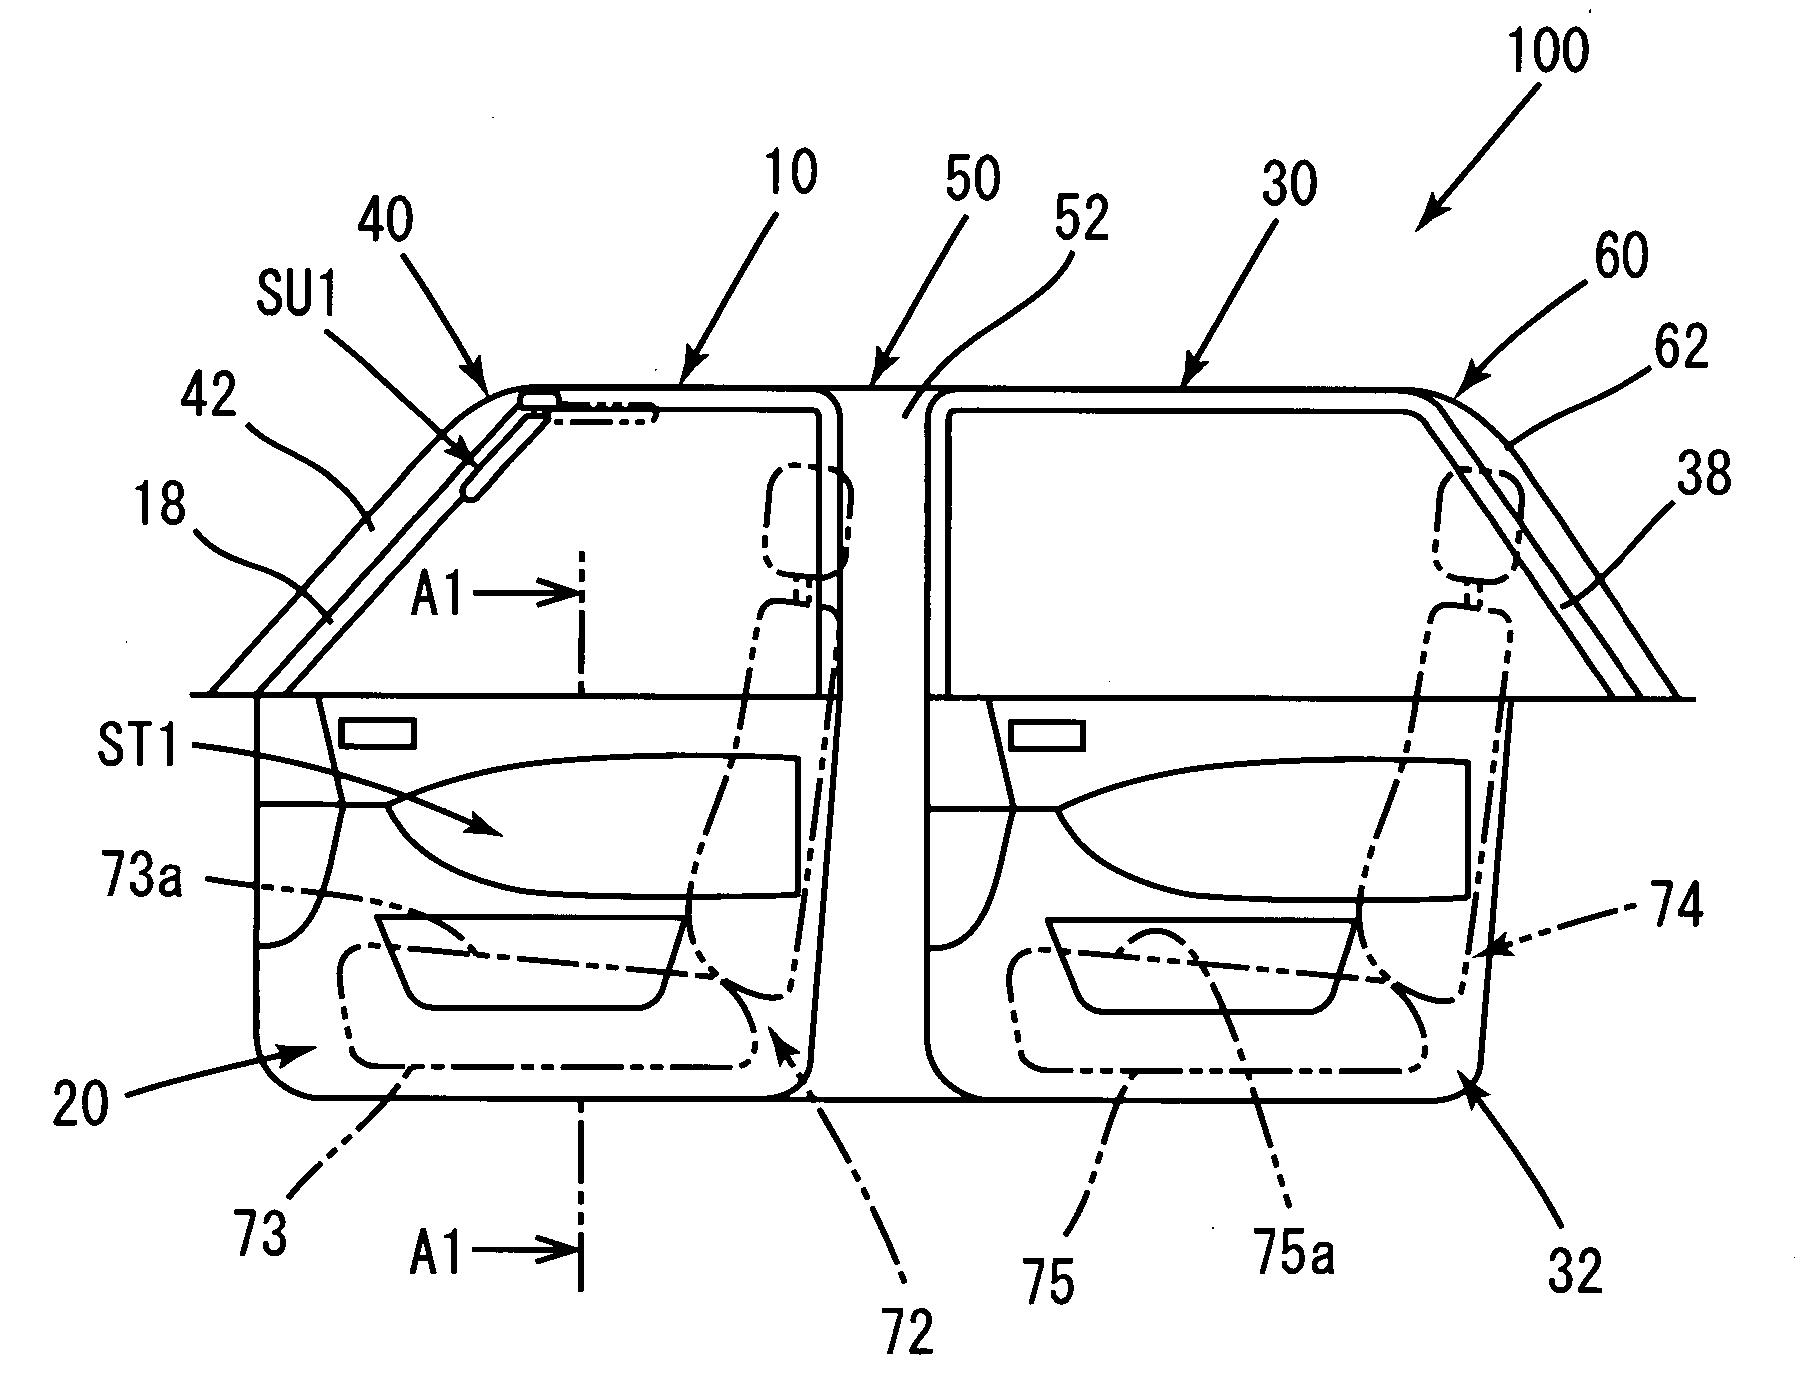 Sun visor for automobile and sound absorbing structure for an automobile